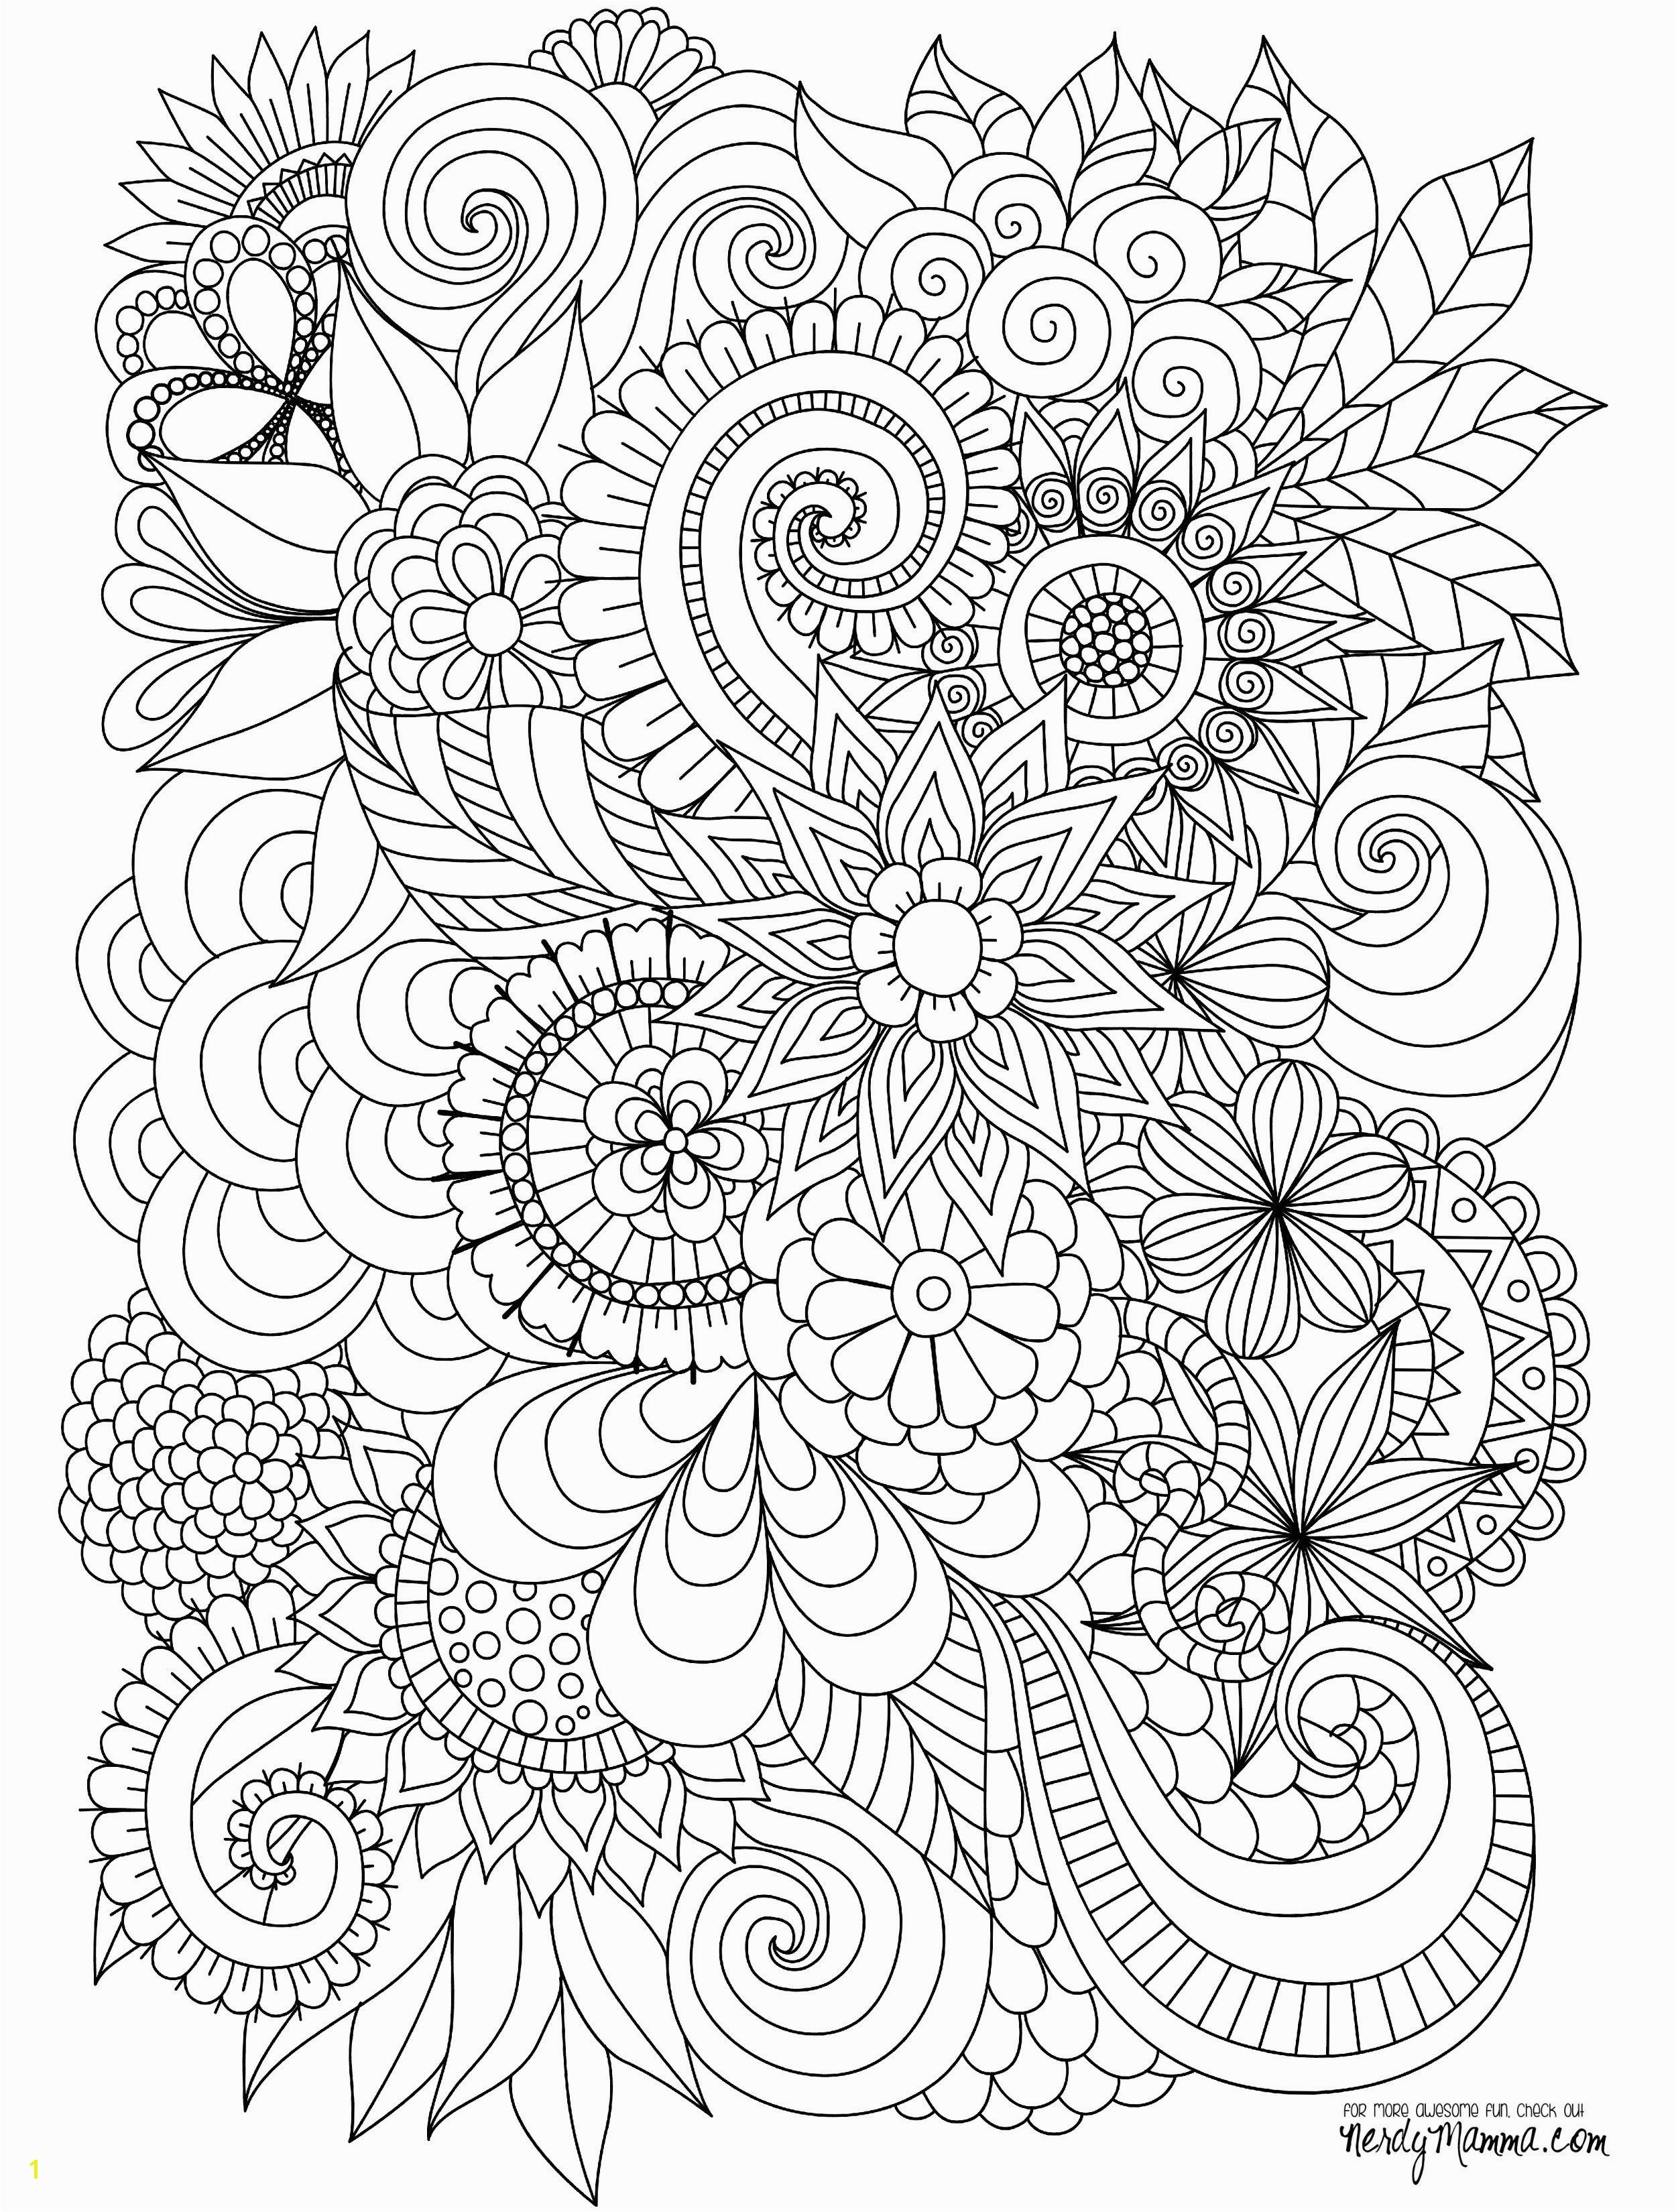 Super Hard Abstract Coloring Pages for Adults Flowers Abstract Coloring Pages Colouring Adult Detailed Advanced